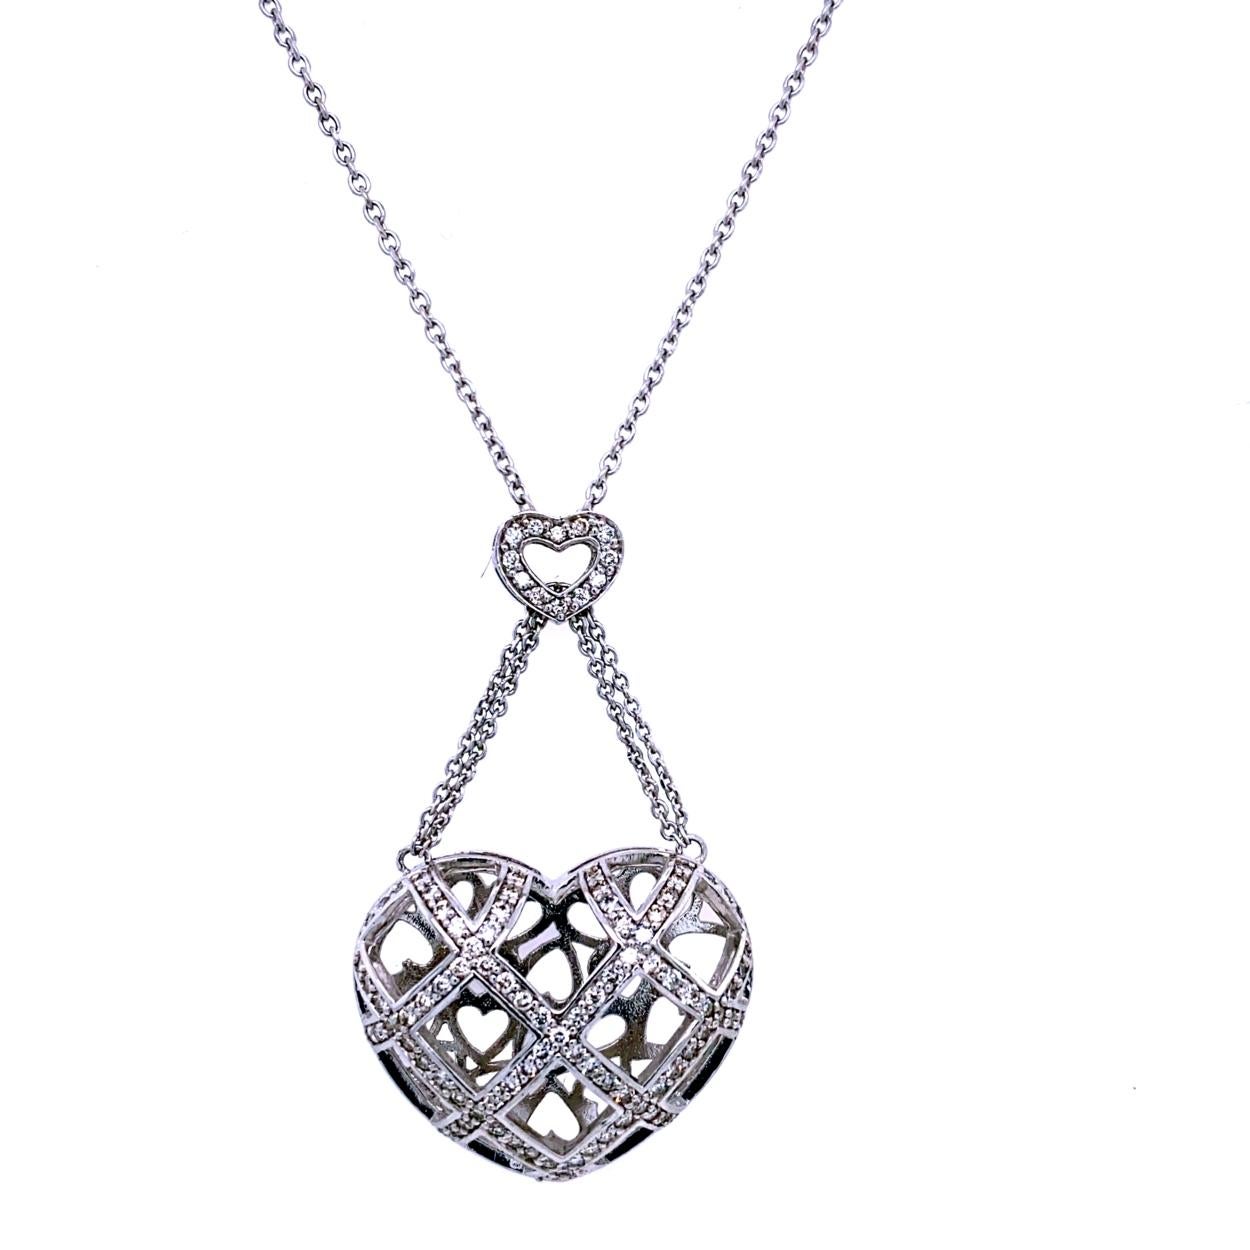 14K Gold Pave Set Puffed Heart Shape Pendant dangling from another heart shape pendant. 99 pieces of Round Brilliant diamonds with total Diamond Weight of 0.90 Ct. Look at the beautiful Heart Shape Gallery on the back.
Total Diamond Weight: 0.90